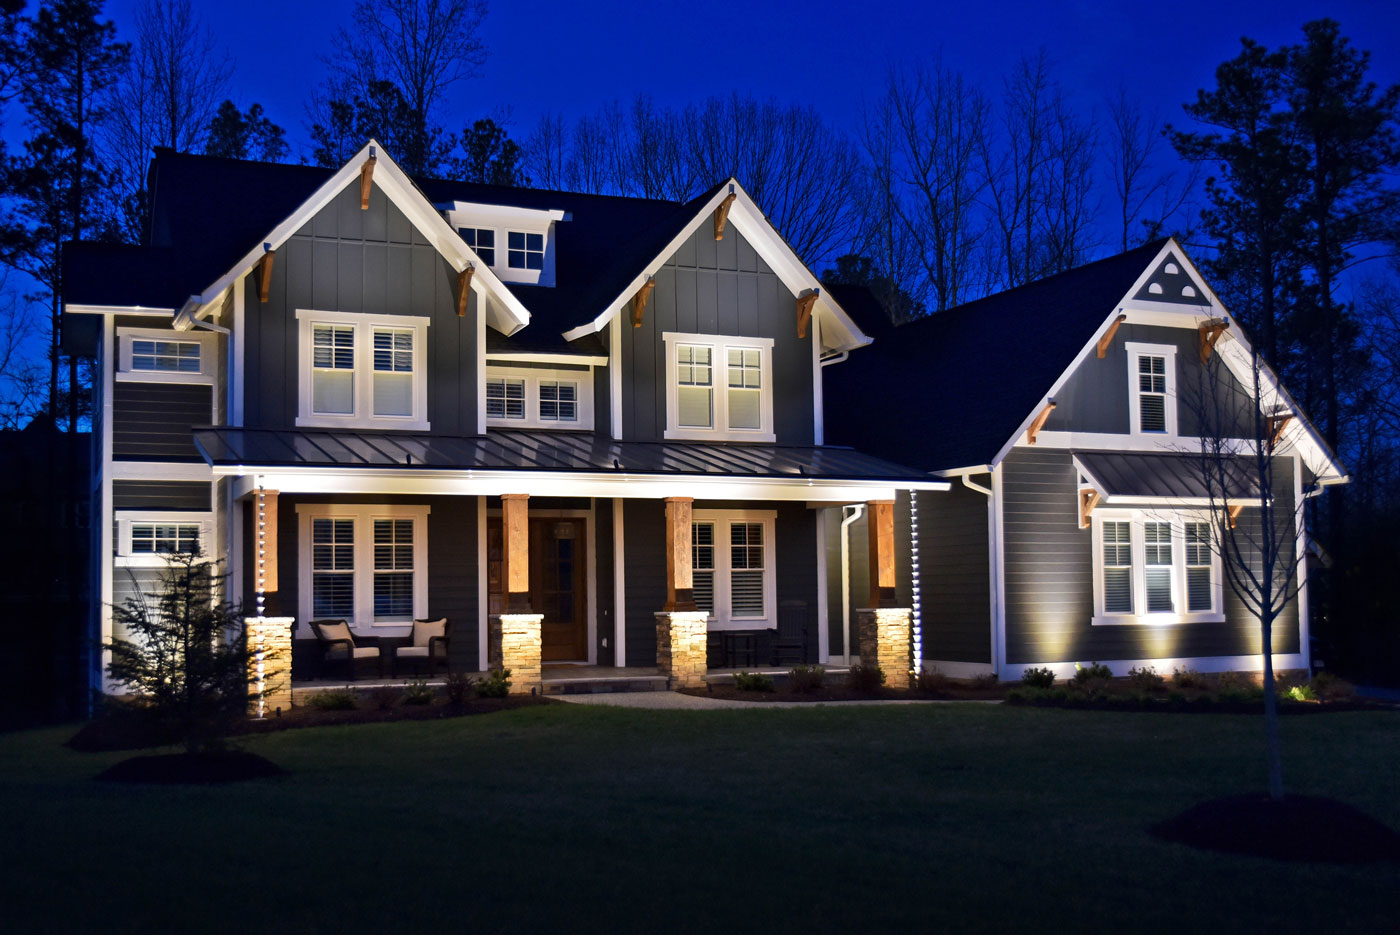 Home with optimal residential lighting